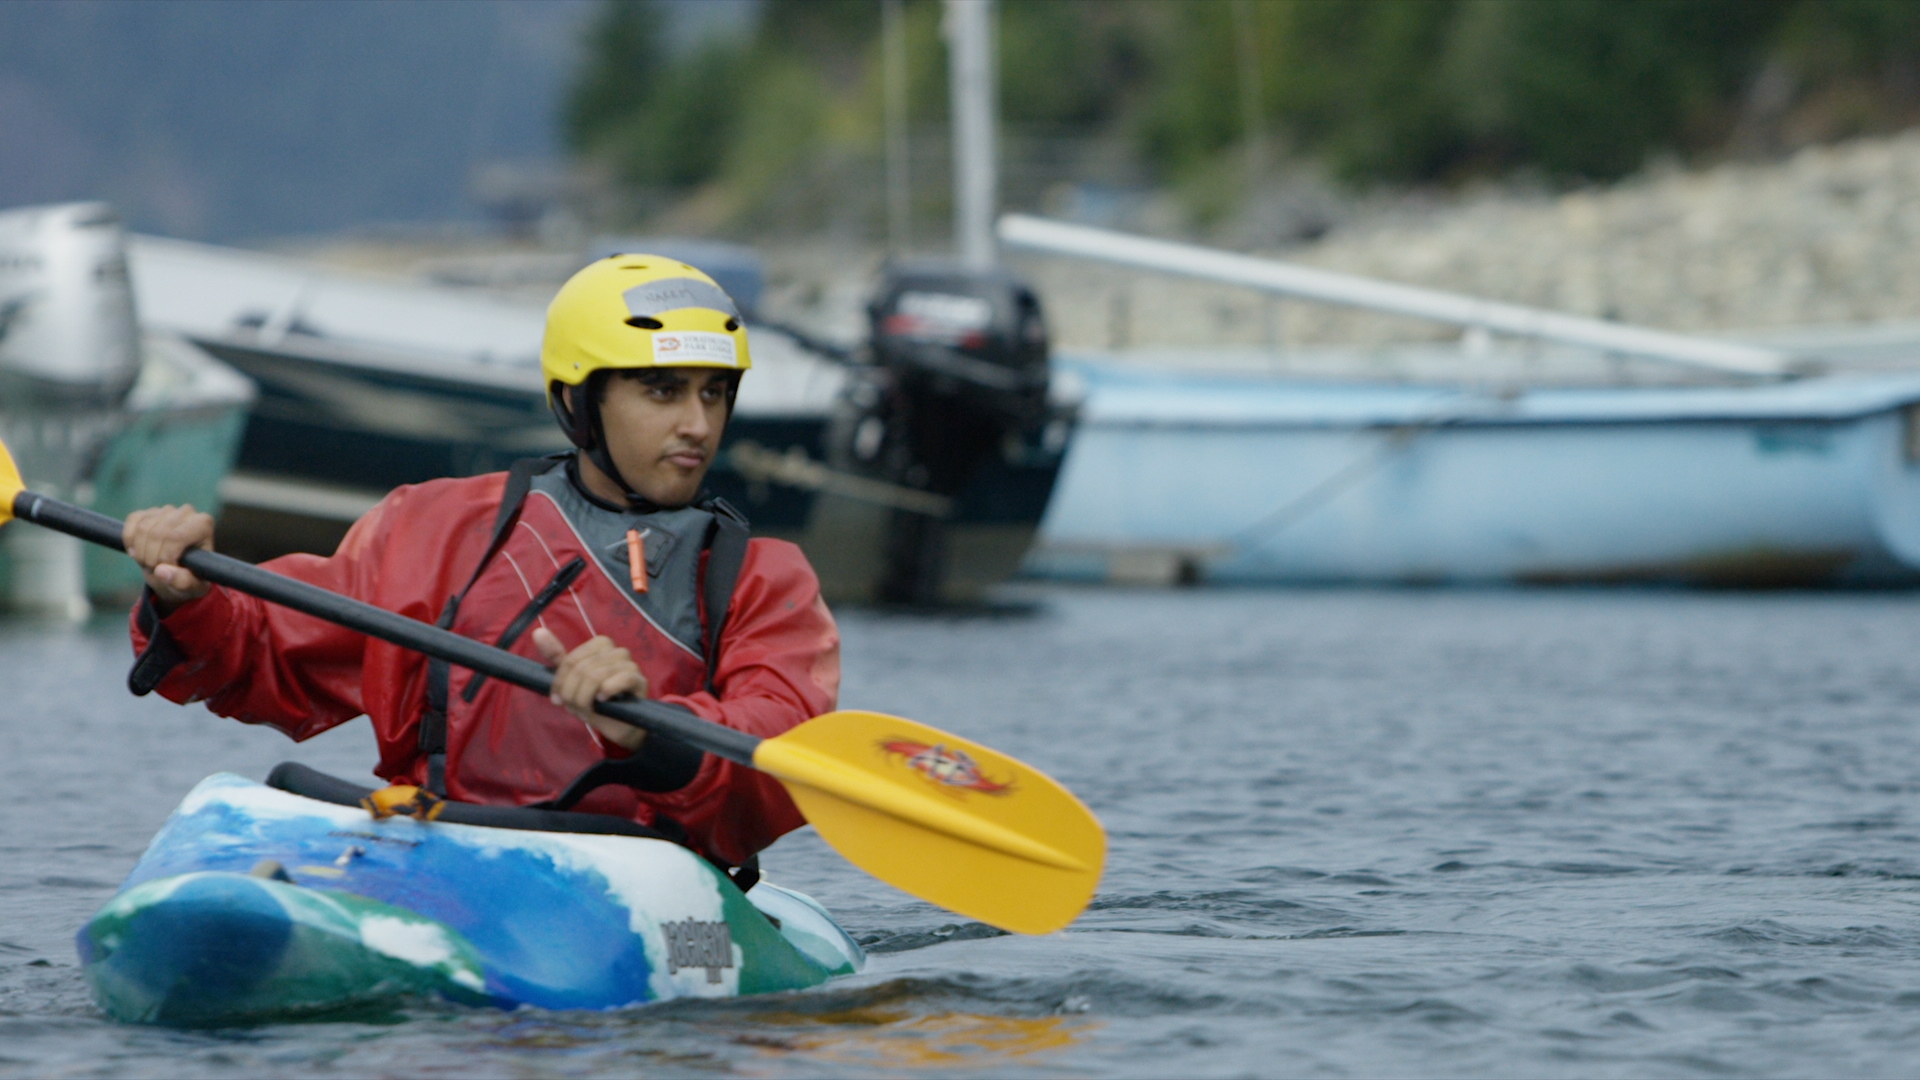 A close up of a kayaker in a red jacket and lifejacket paddles near the shoreline of the Campbell River